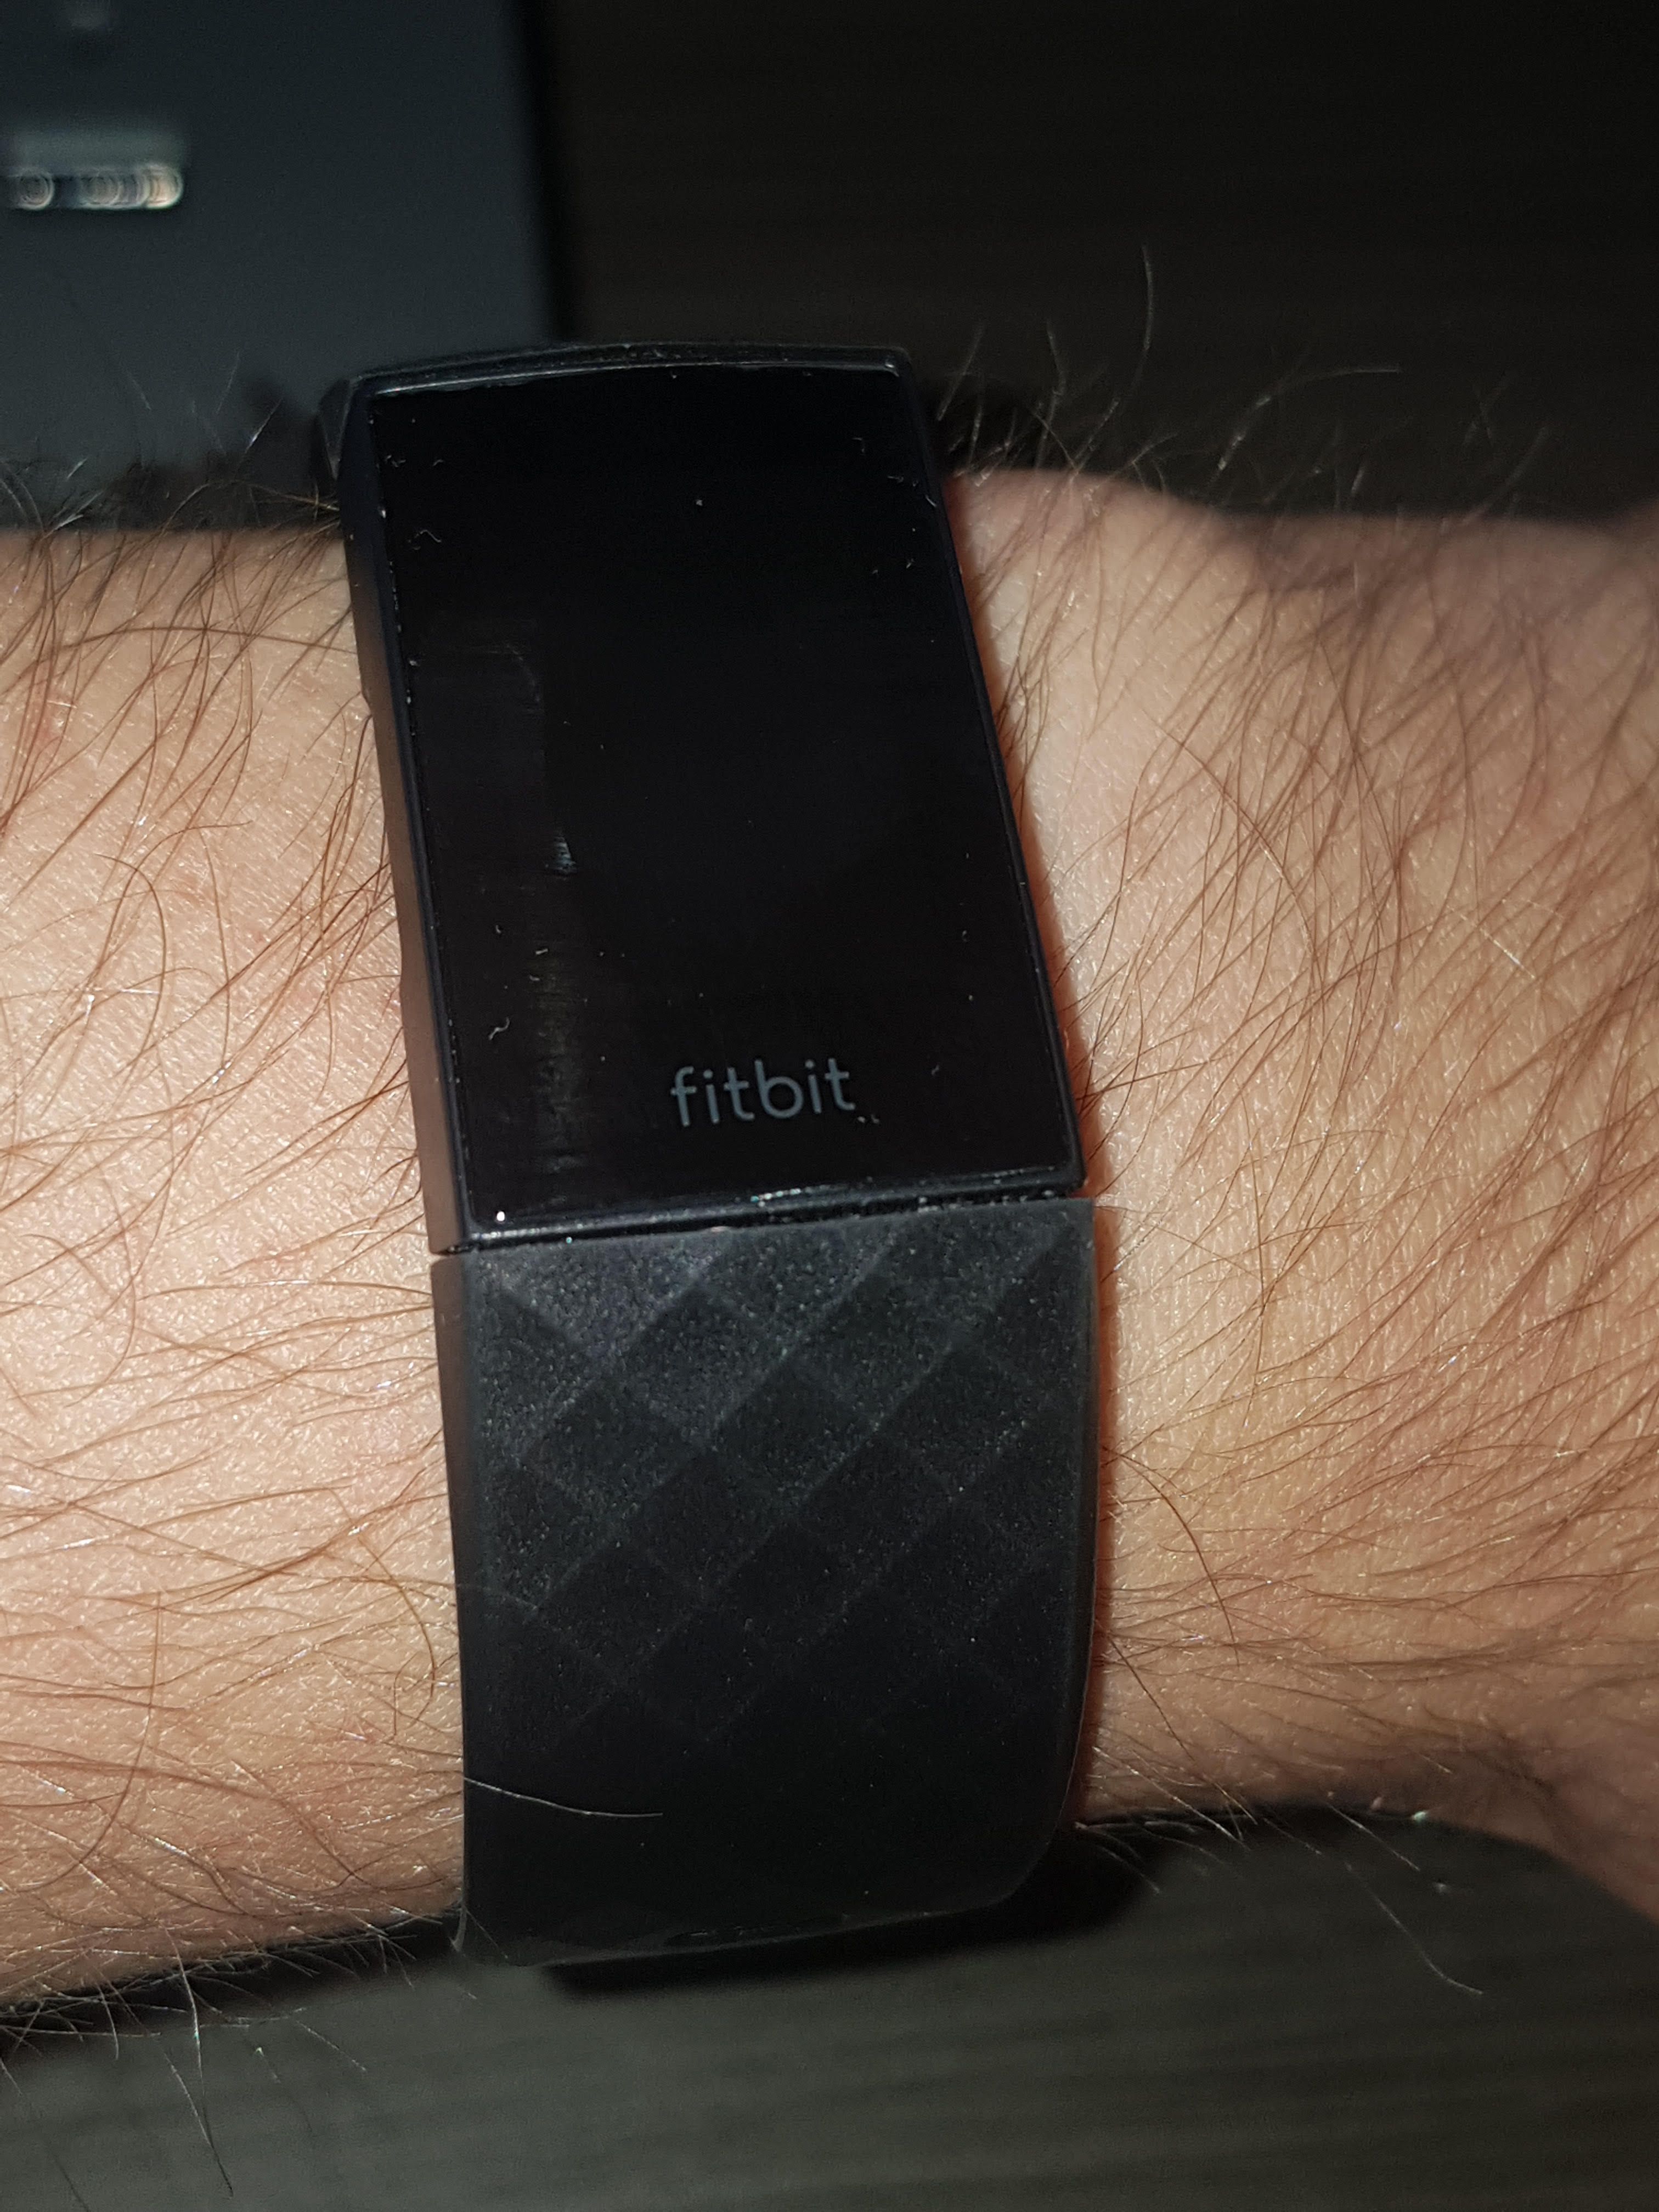 fitbit charge strap broken